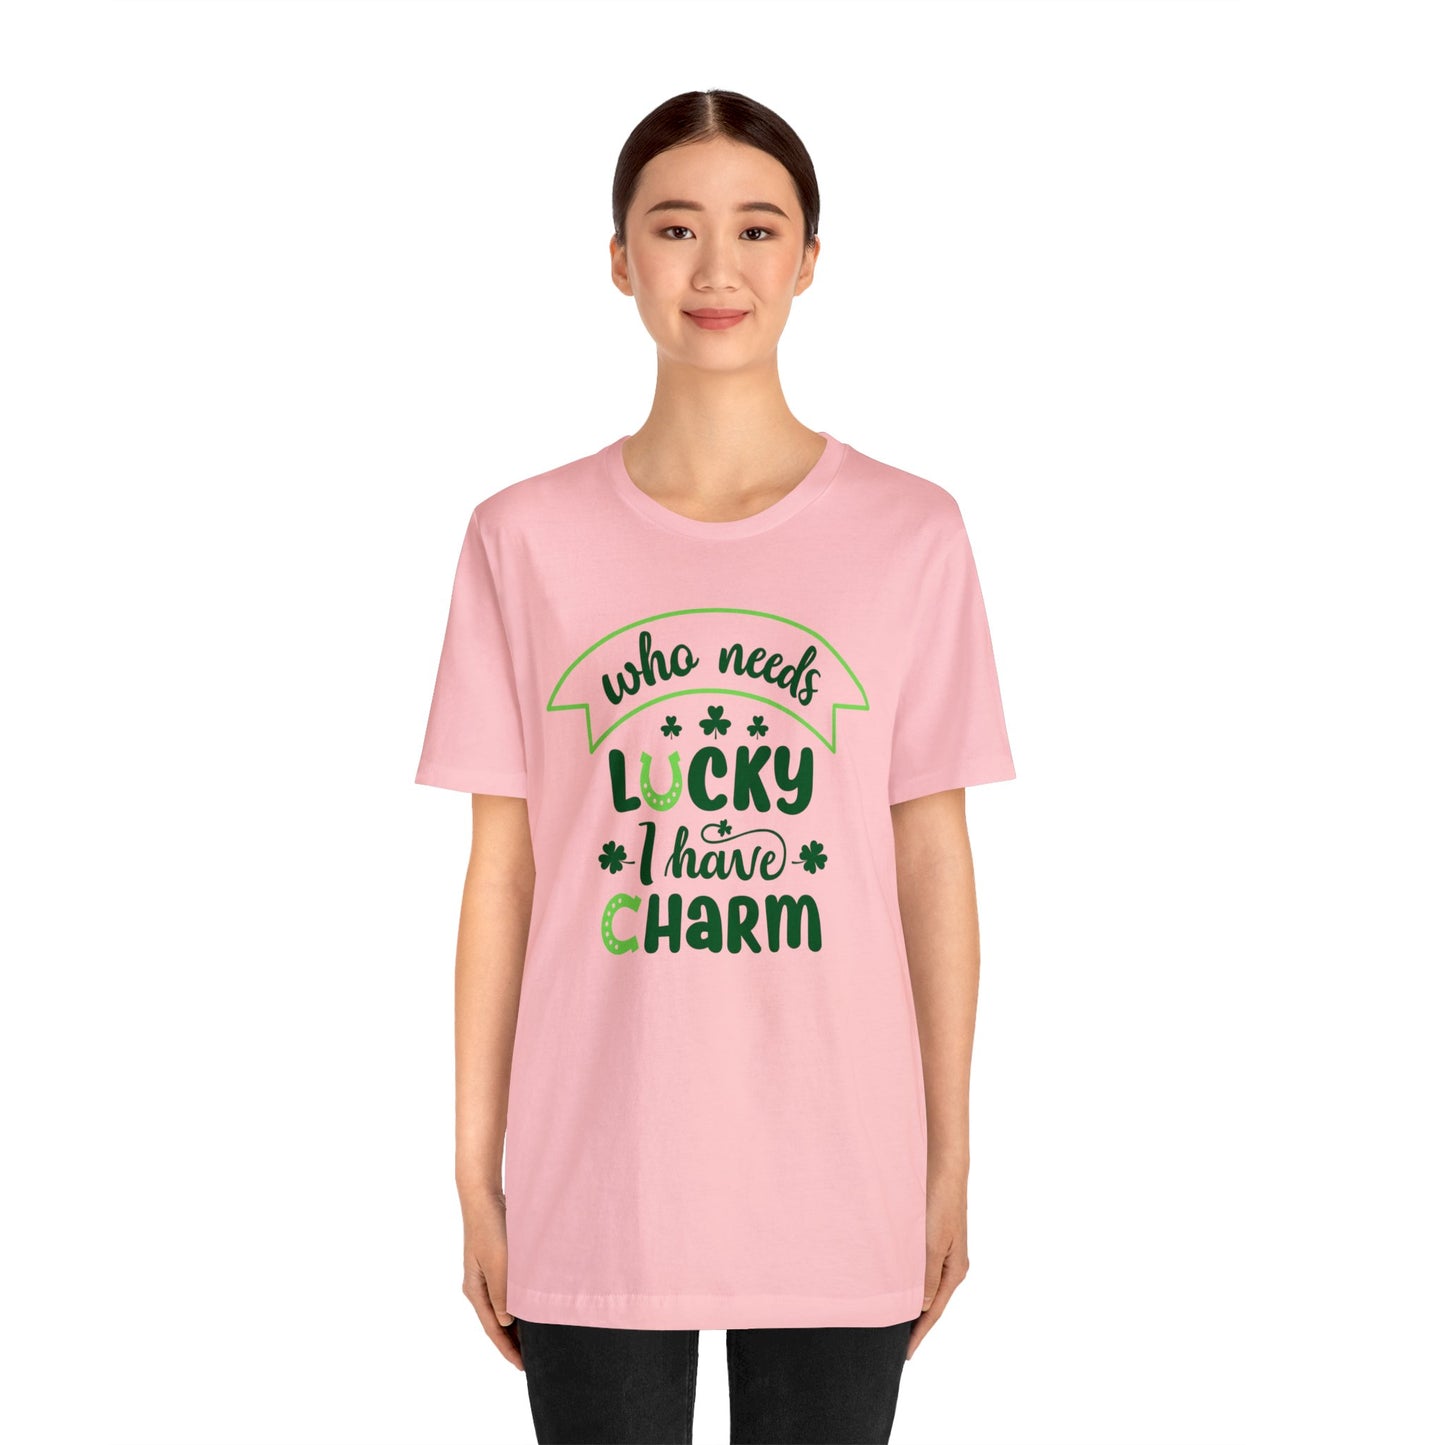 Who needs lucky I have charm St Patrick's Day shirt Feeling Lucky Shirt